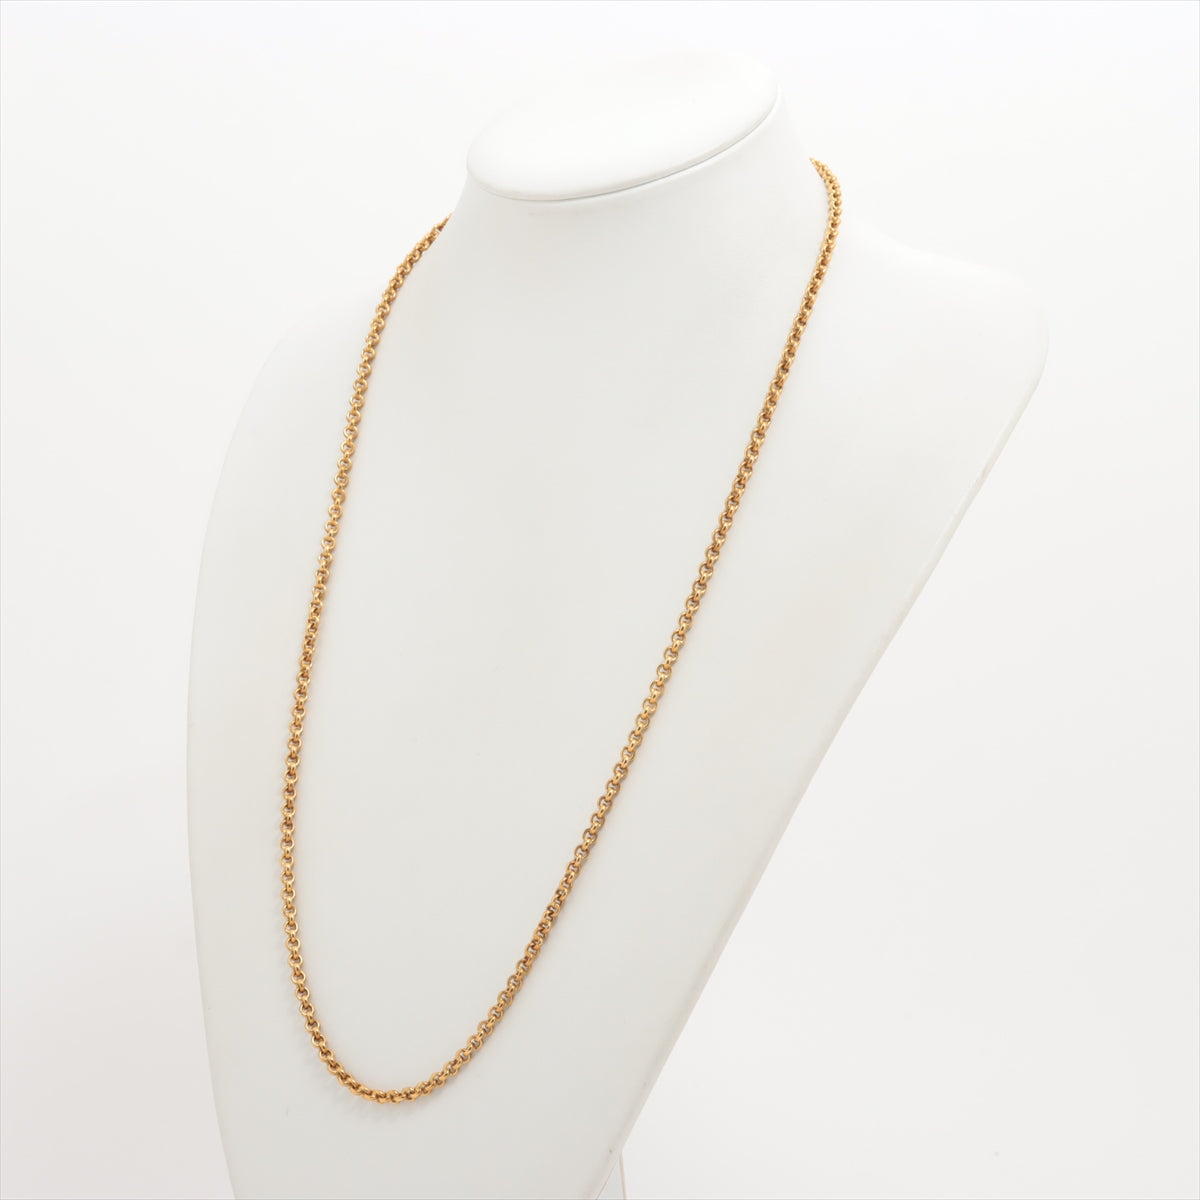 Pomerate necklace chain 750 (YG  WG) 49.4g